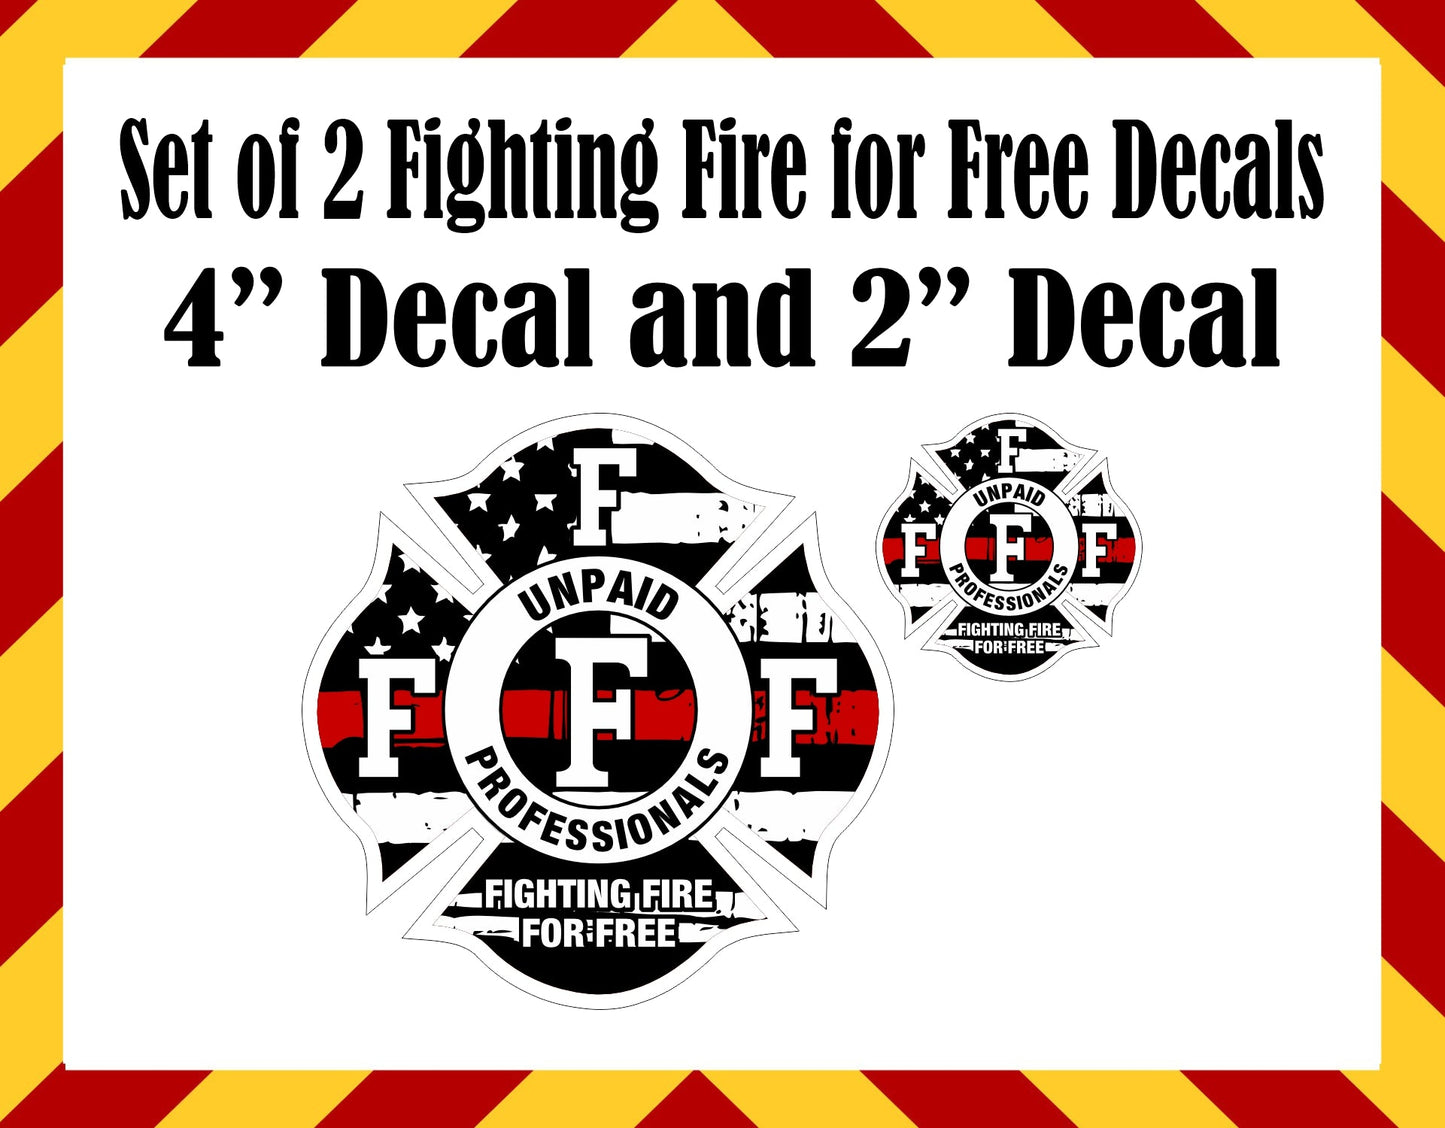 Window Stickers - Fighting Fire for Free Set of Decals 4" and 2"